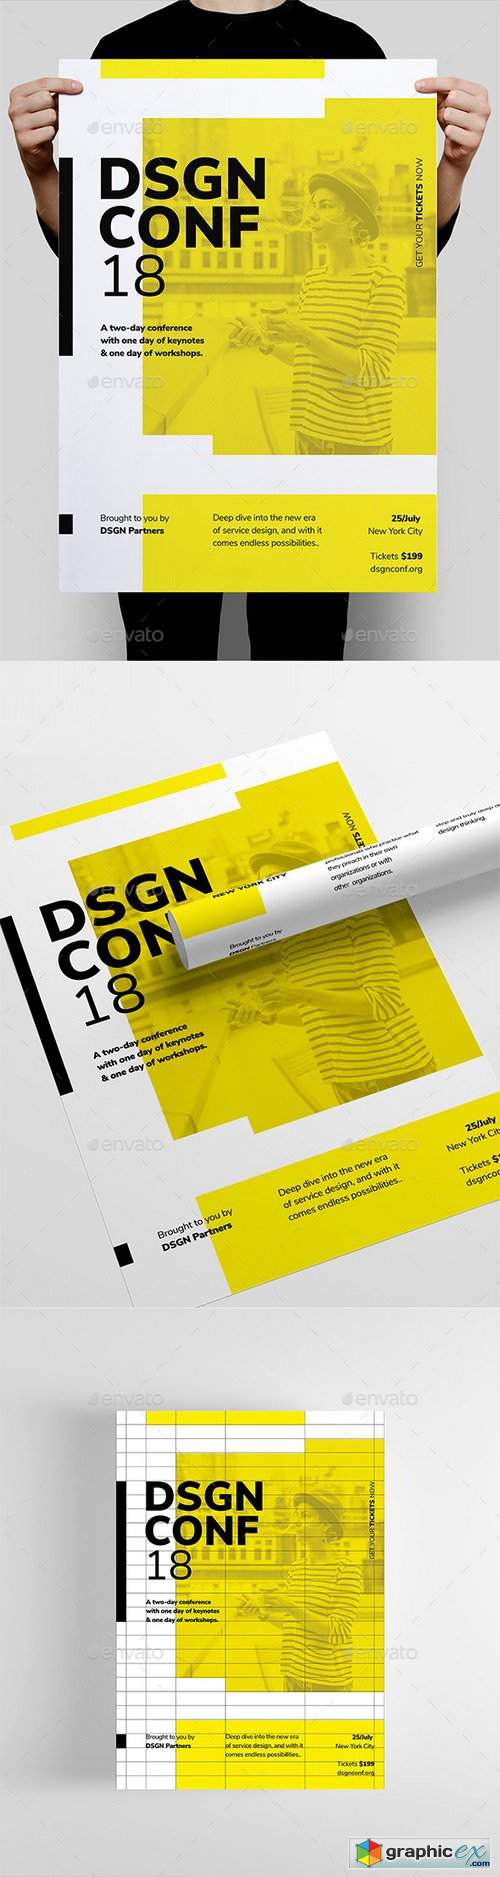 DSGN Series 9 Poster / Flyer Template